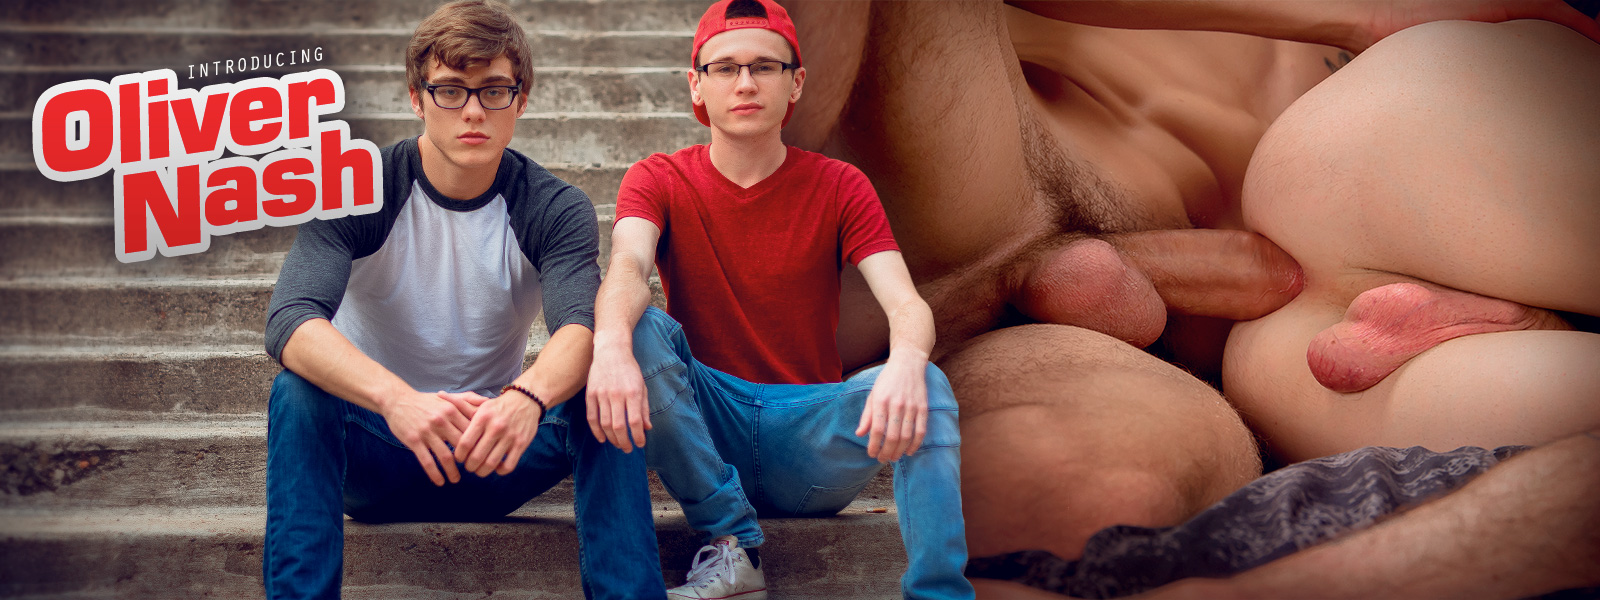 Hunk Blake Mitchell is excited to get the little twink Oliver Nash to the bedroom